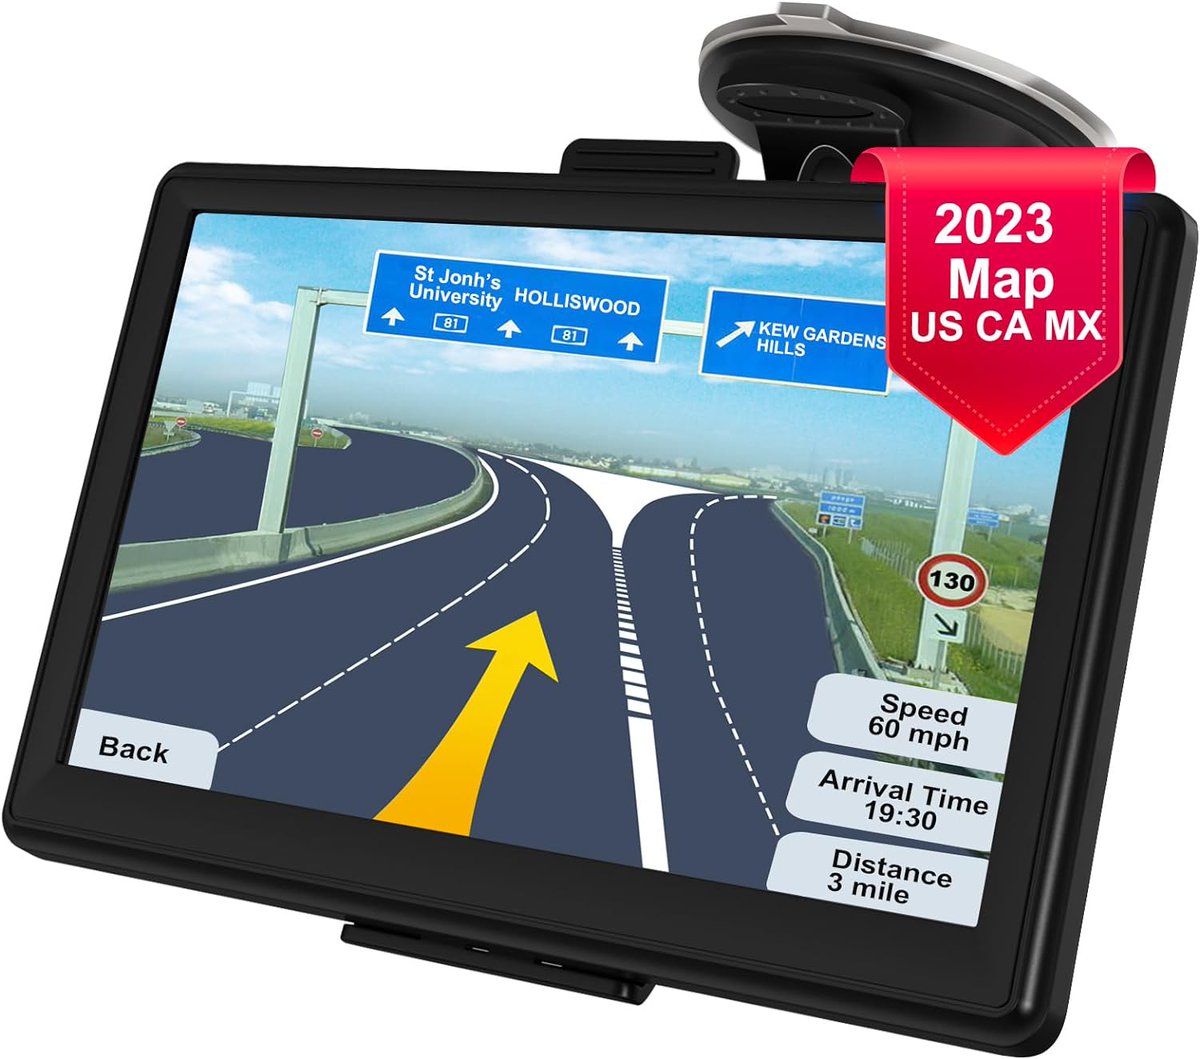 |Features/Details/Reviews| Liontru GPS Navigation System for Car Truck RV, 7 inch Car GPS Navigator with Touchscreen, 2023 America Maps, Free Lifetime Updates... #LiontruGPSNavigationSystem #Liontru #GPSNavigationSystem #NavigationSystem pinterest.com/pin/5956714882…